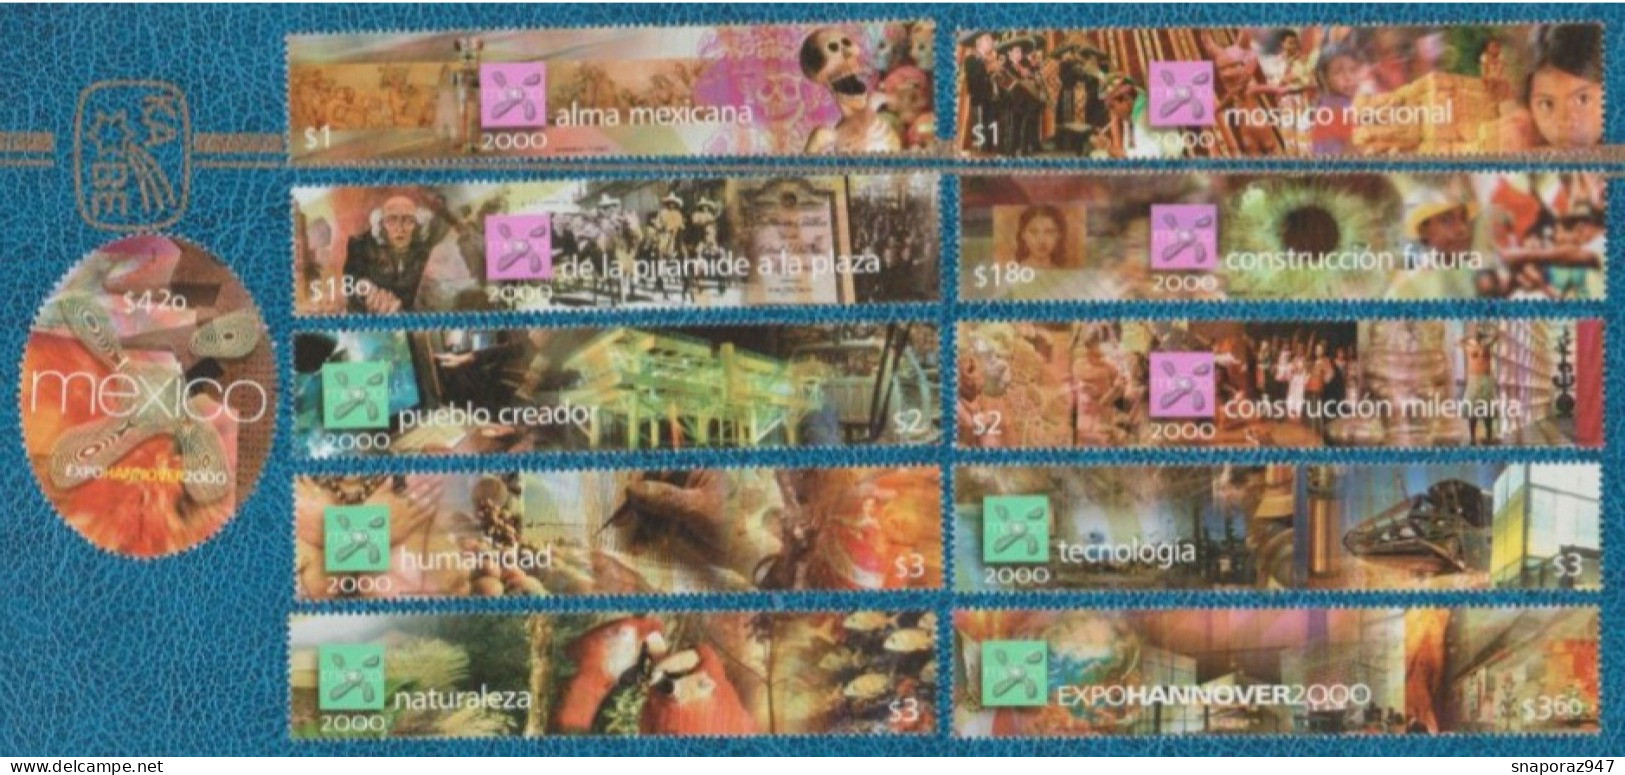 2000 Messico "Expo 2000" Universal Exhibition In Hanover (Block Printed) Set MNH** RX77 - 2000 – Hannover (Alemania)